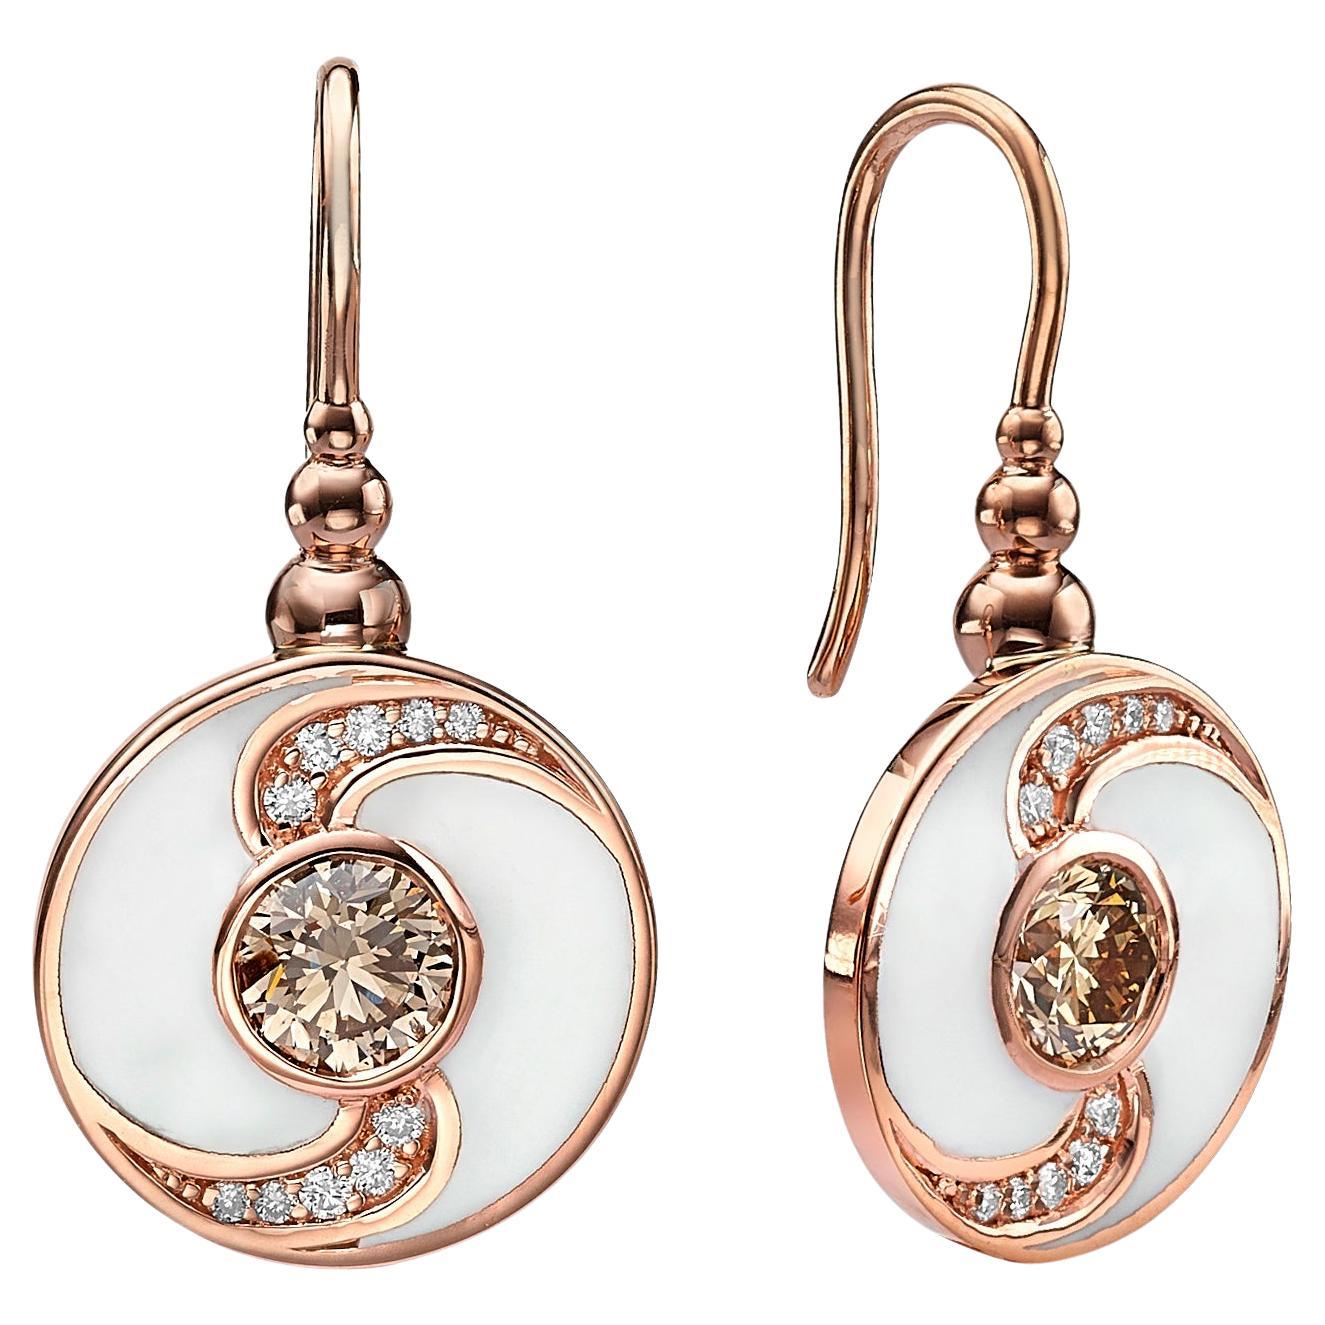 Venice Collection: Round Shaped White Enamel Diamond Earrings in 18k Rose Gold